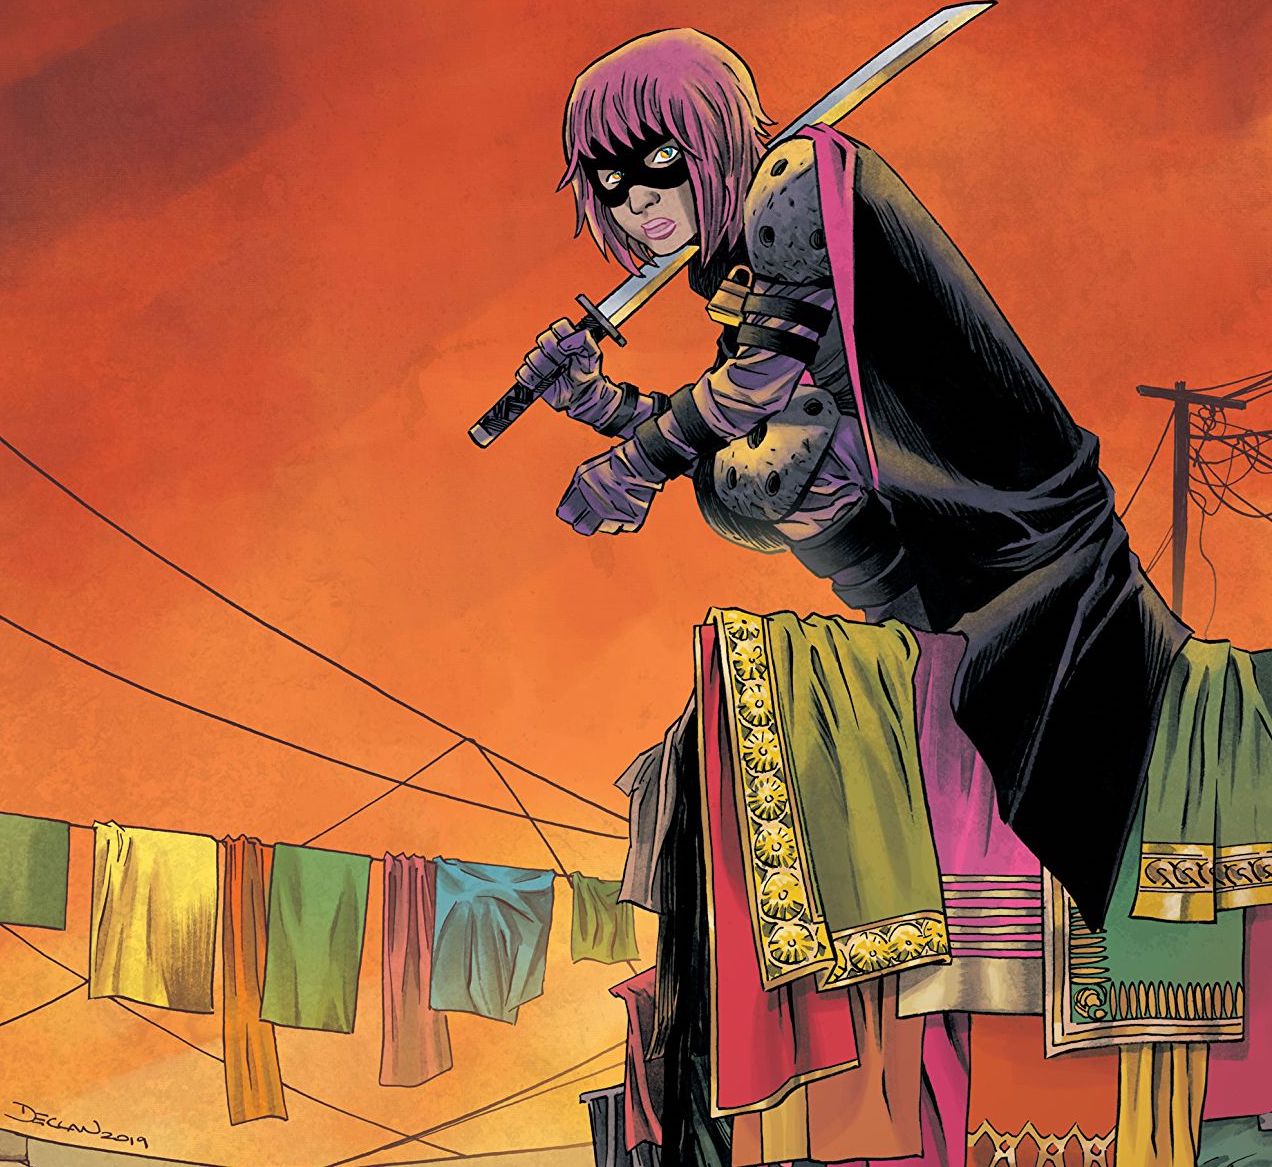 Hit-Girl Vol. 6: In India Review